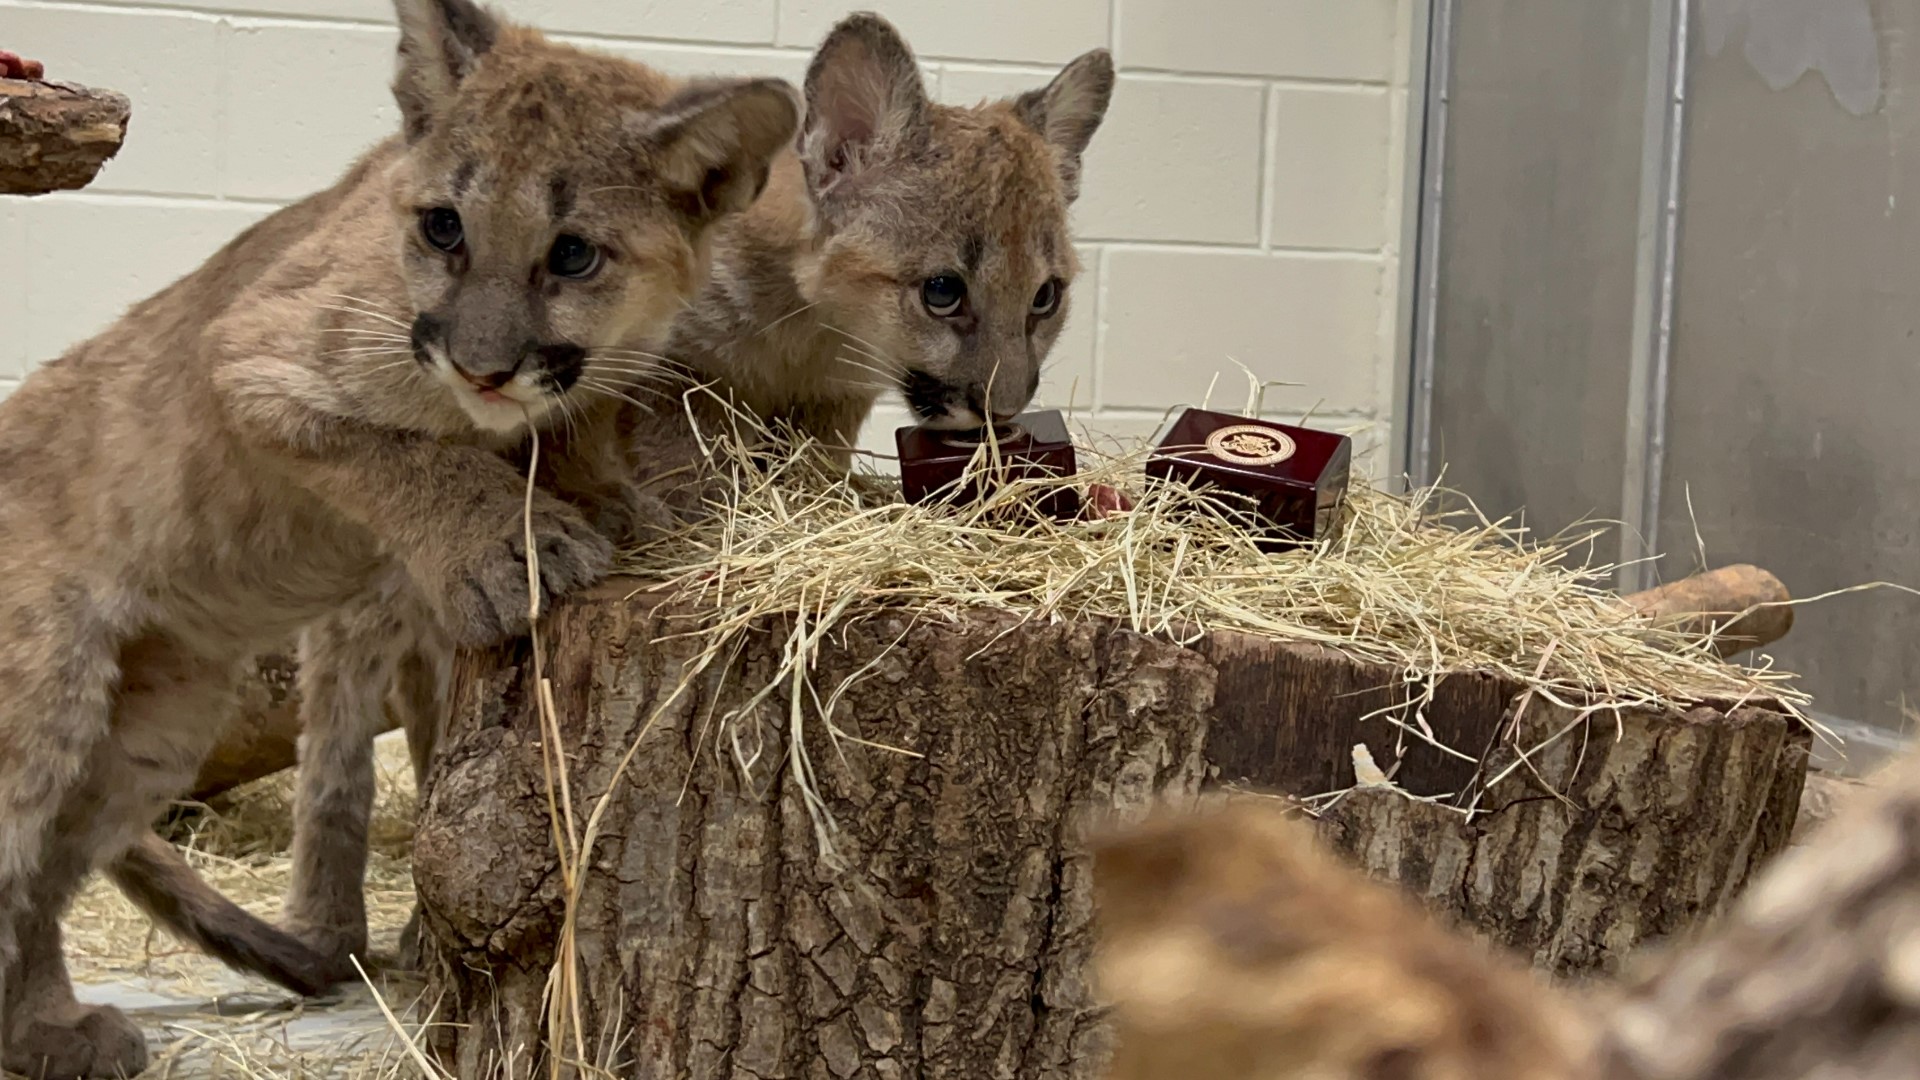 Shasta VII and his brother Louie, two new cougar cubs at the Houston Zoo, are already taking part in the long-held UH tradition of guarding the rings